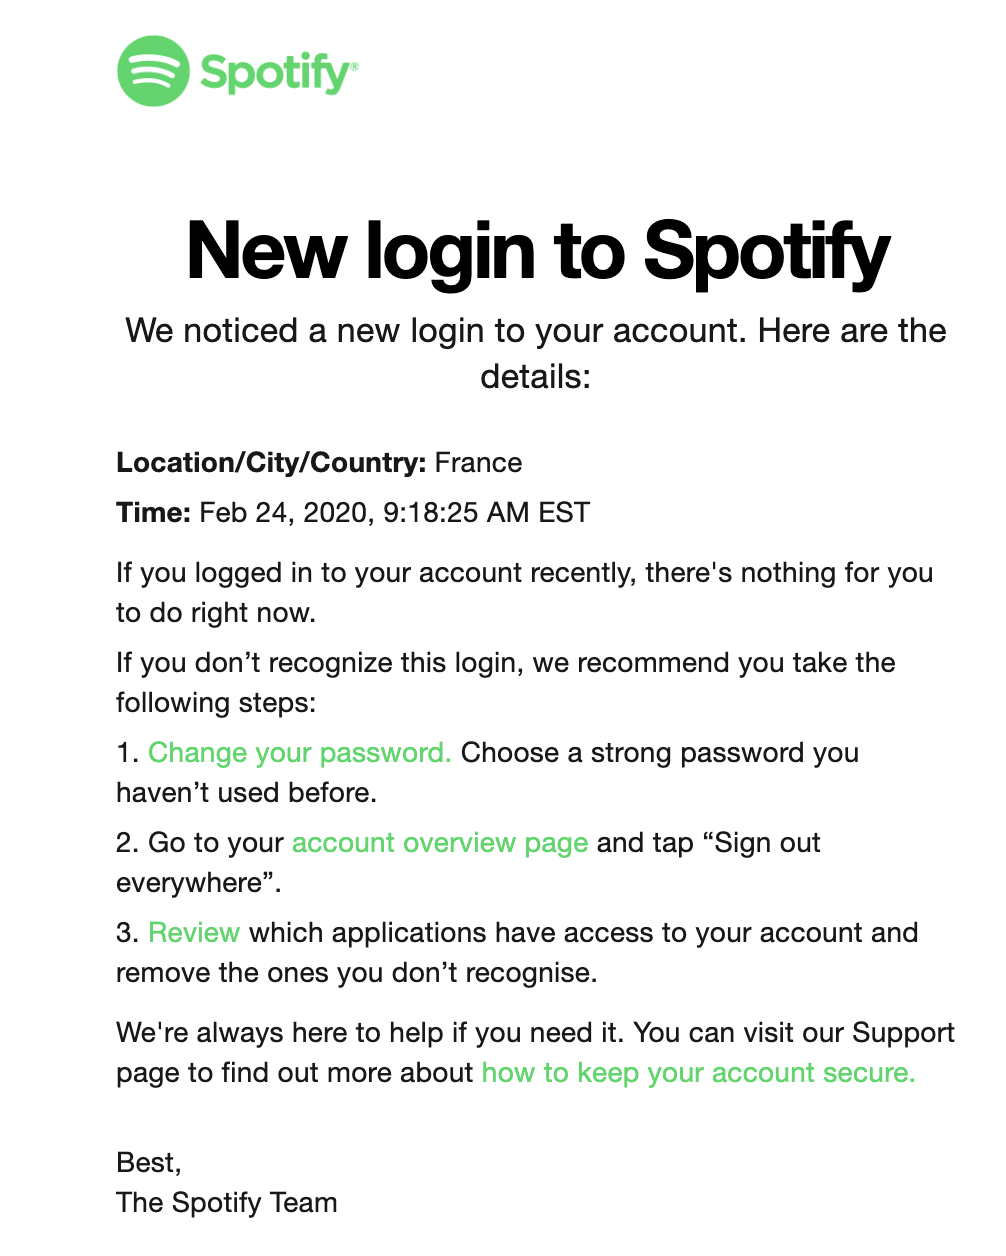 I KEEP GETTING HACKED - The Spotify Community